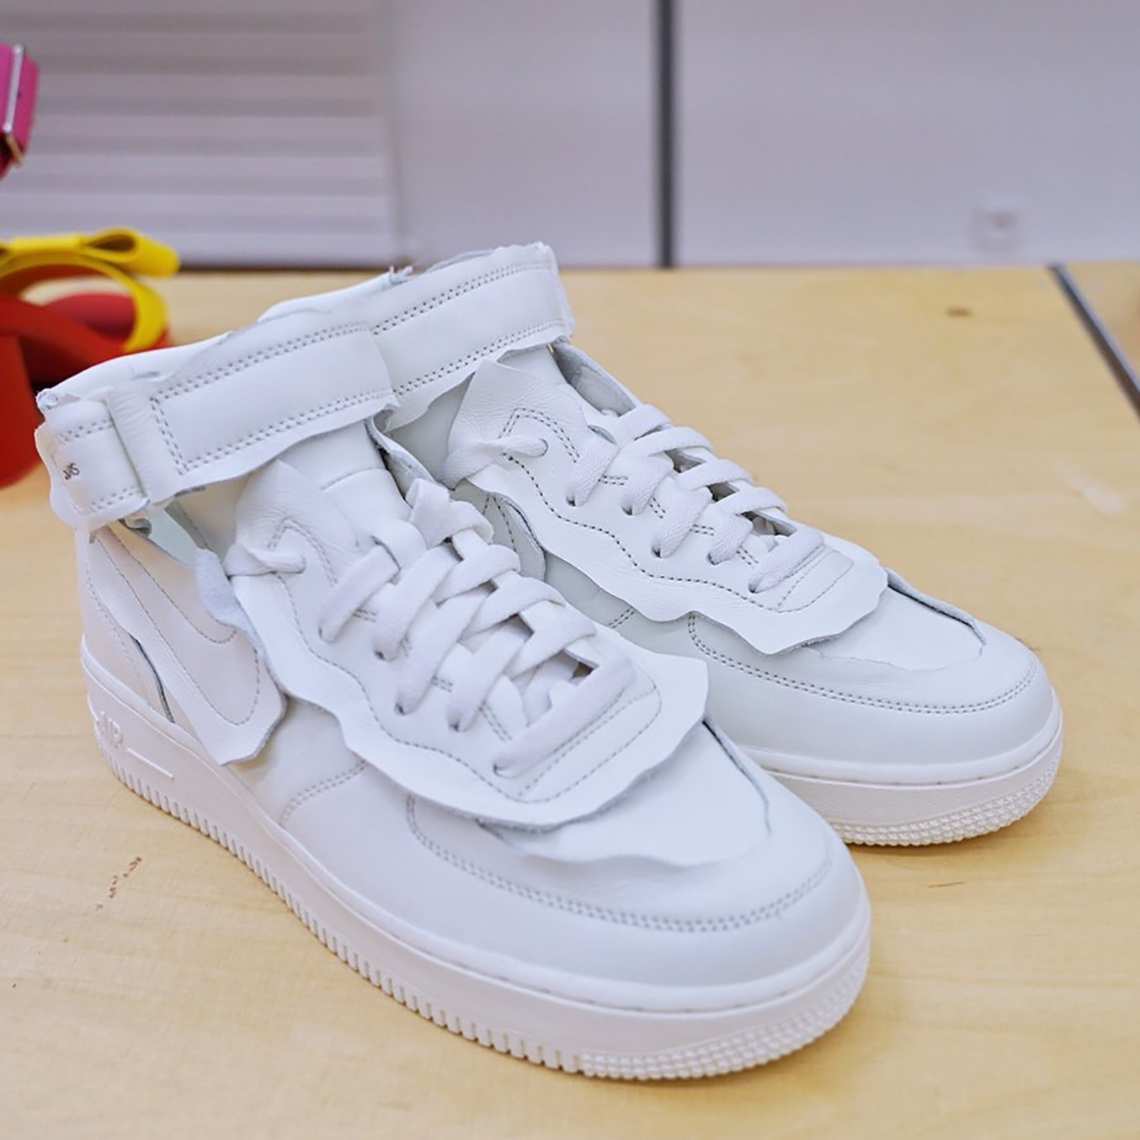 COMME des GARCONS Nike Air Force 1 AW 